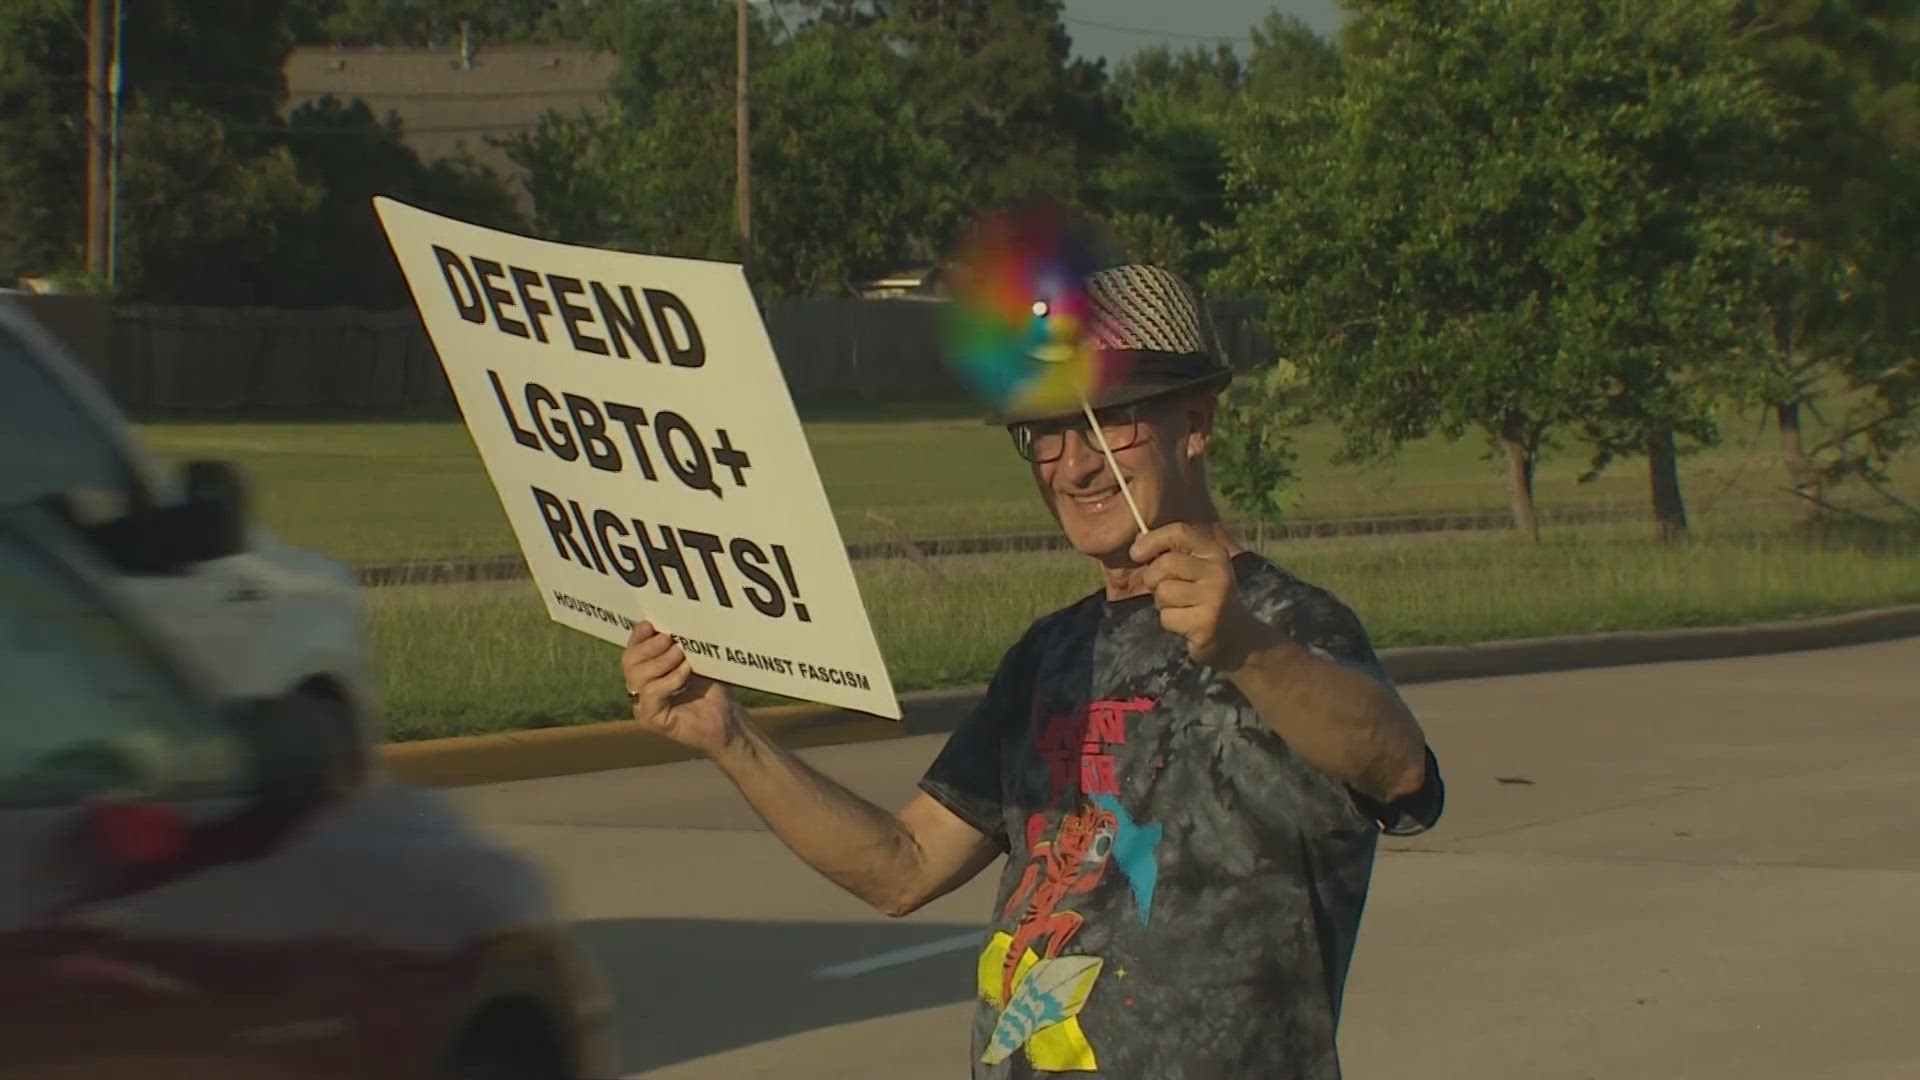 After a drag bingo event at a Katy church spurred dueling rallies last fall, First Christian Church held another event to raise money for the LGBTQ+ community.